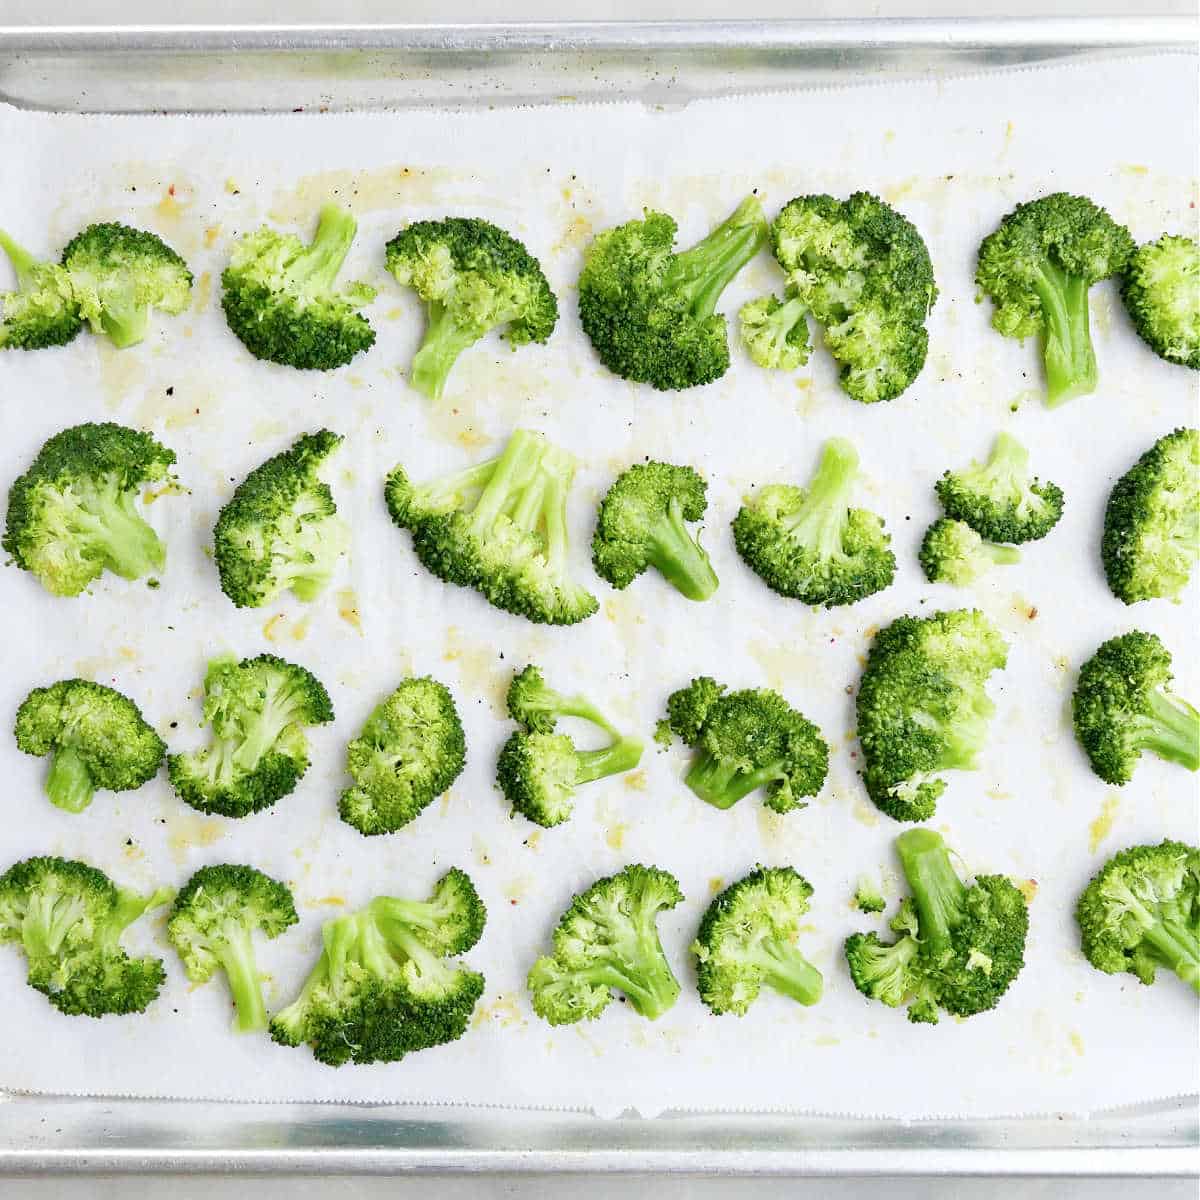 steamed broccoli smashed into flat pieces on a lined baking sheet